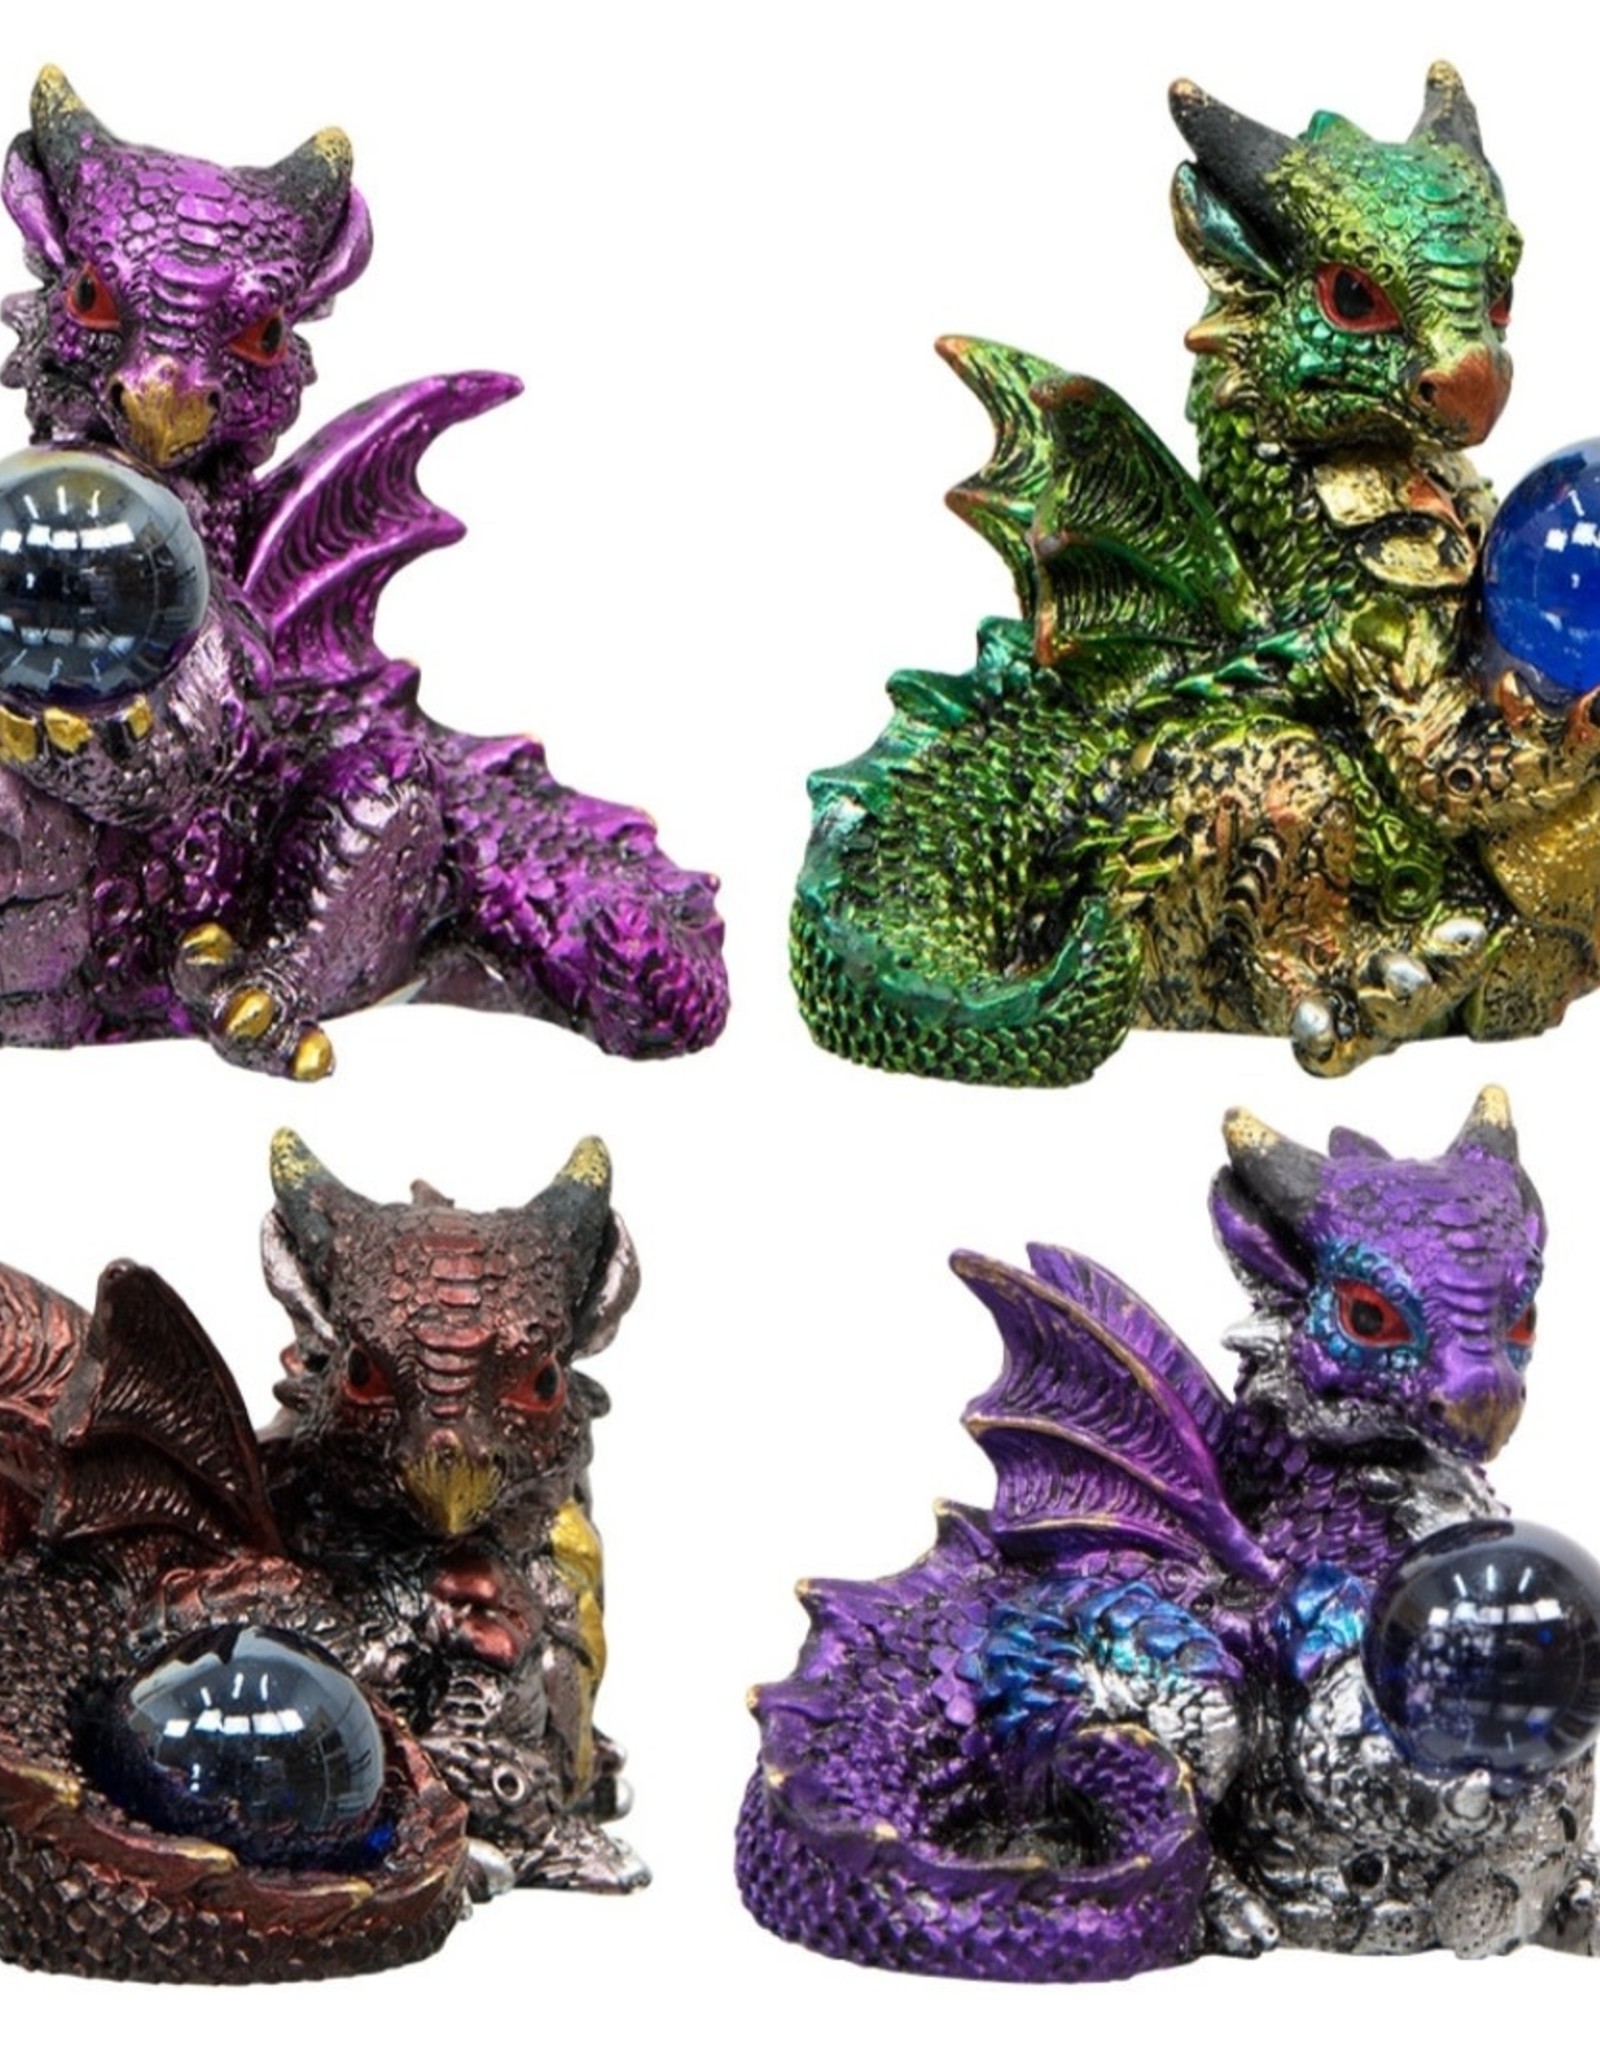 Pacific Trading Mini Cute Baby Dragons with Sphere 2"  Resin Statue